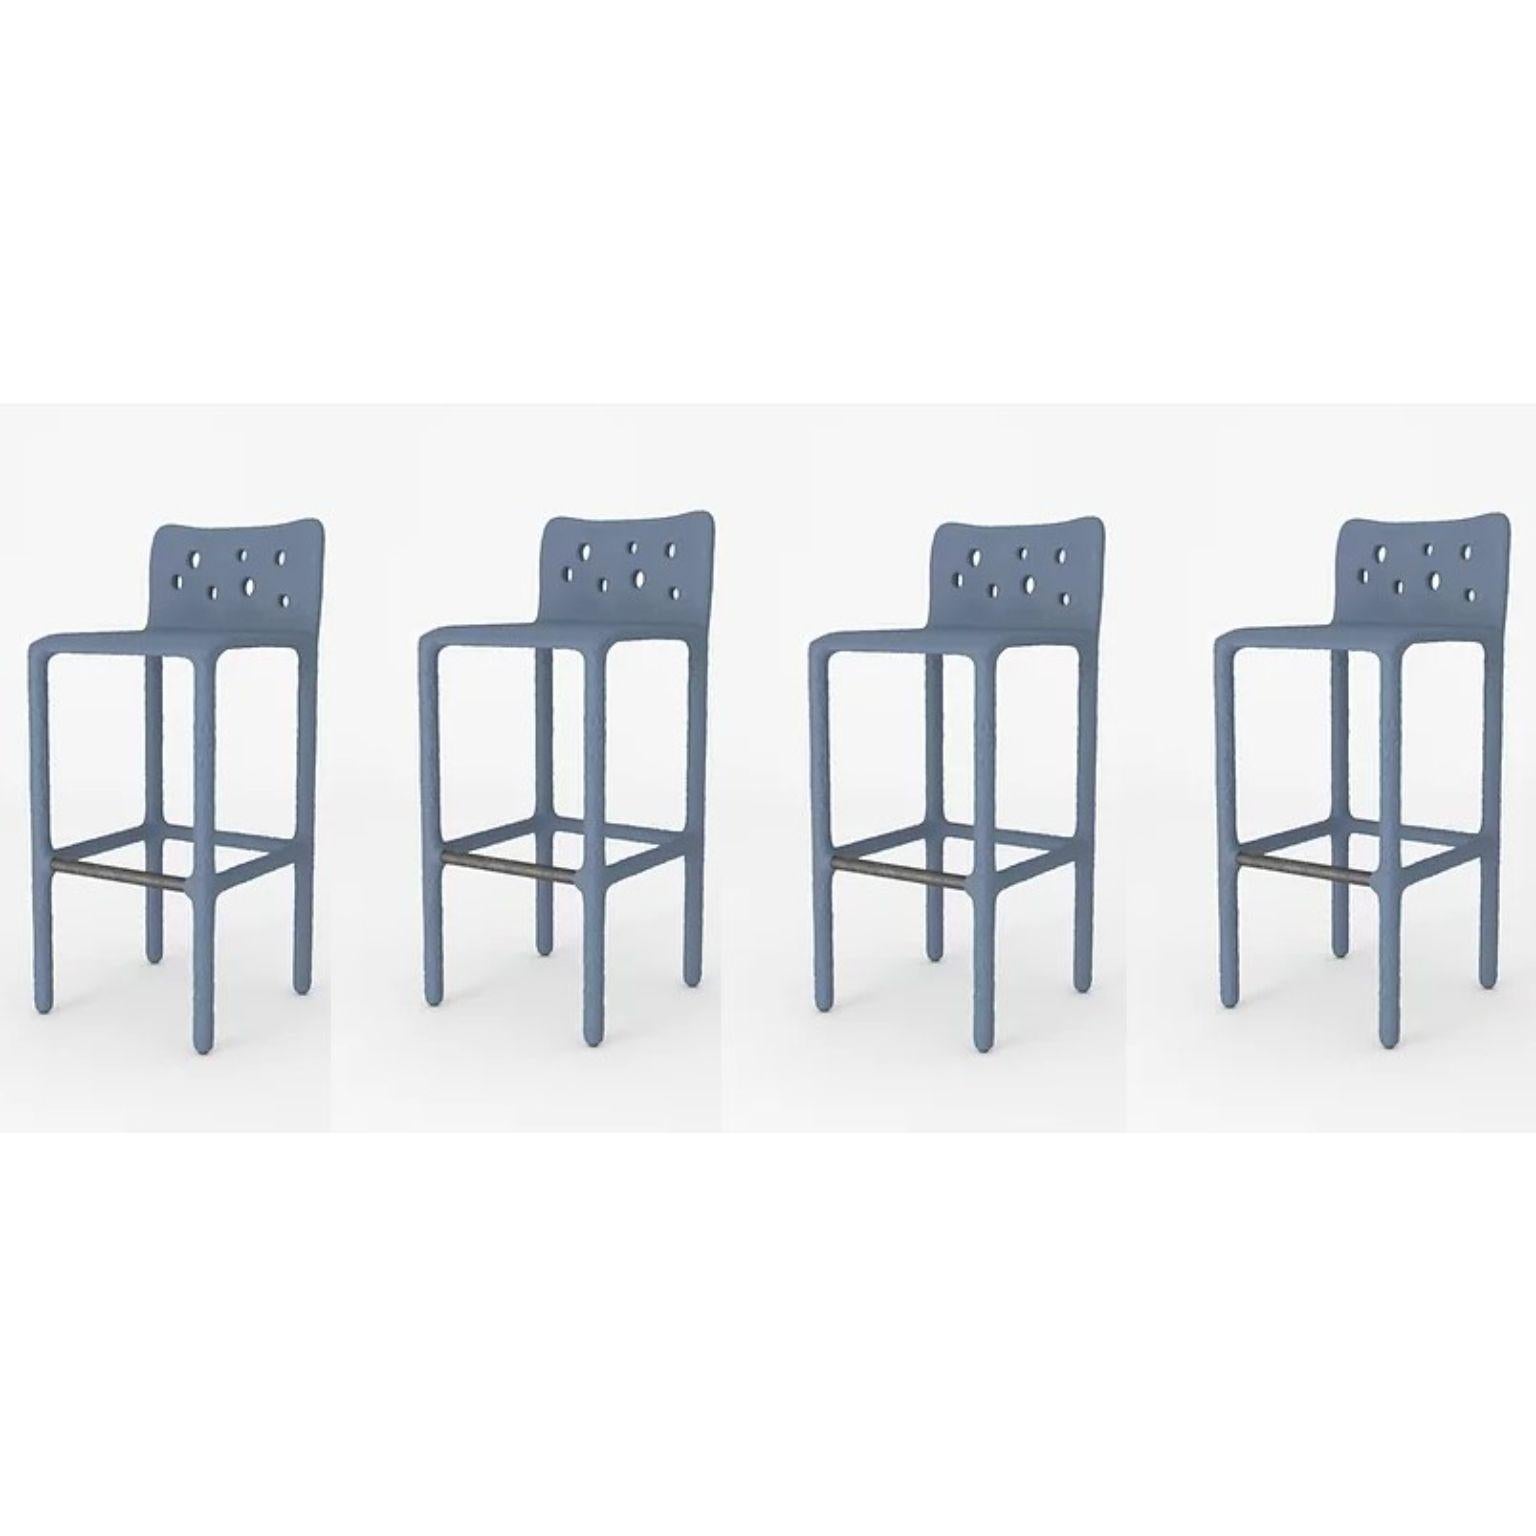 Set of 4 blue sculpted contemporary chair by Faina
Design: Victoriya Yakusha
Material: steel, flax rubber, biopolymer, cellulose
Dimensions: height: 106 x width: 45 x sitting place width: 49 Legs height: 80 cm
Weight: 20 kilos.
Outdoot finish